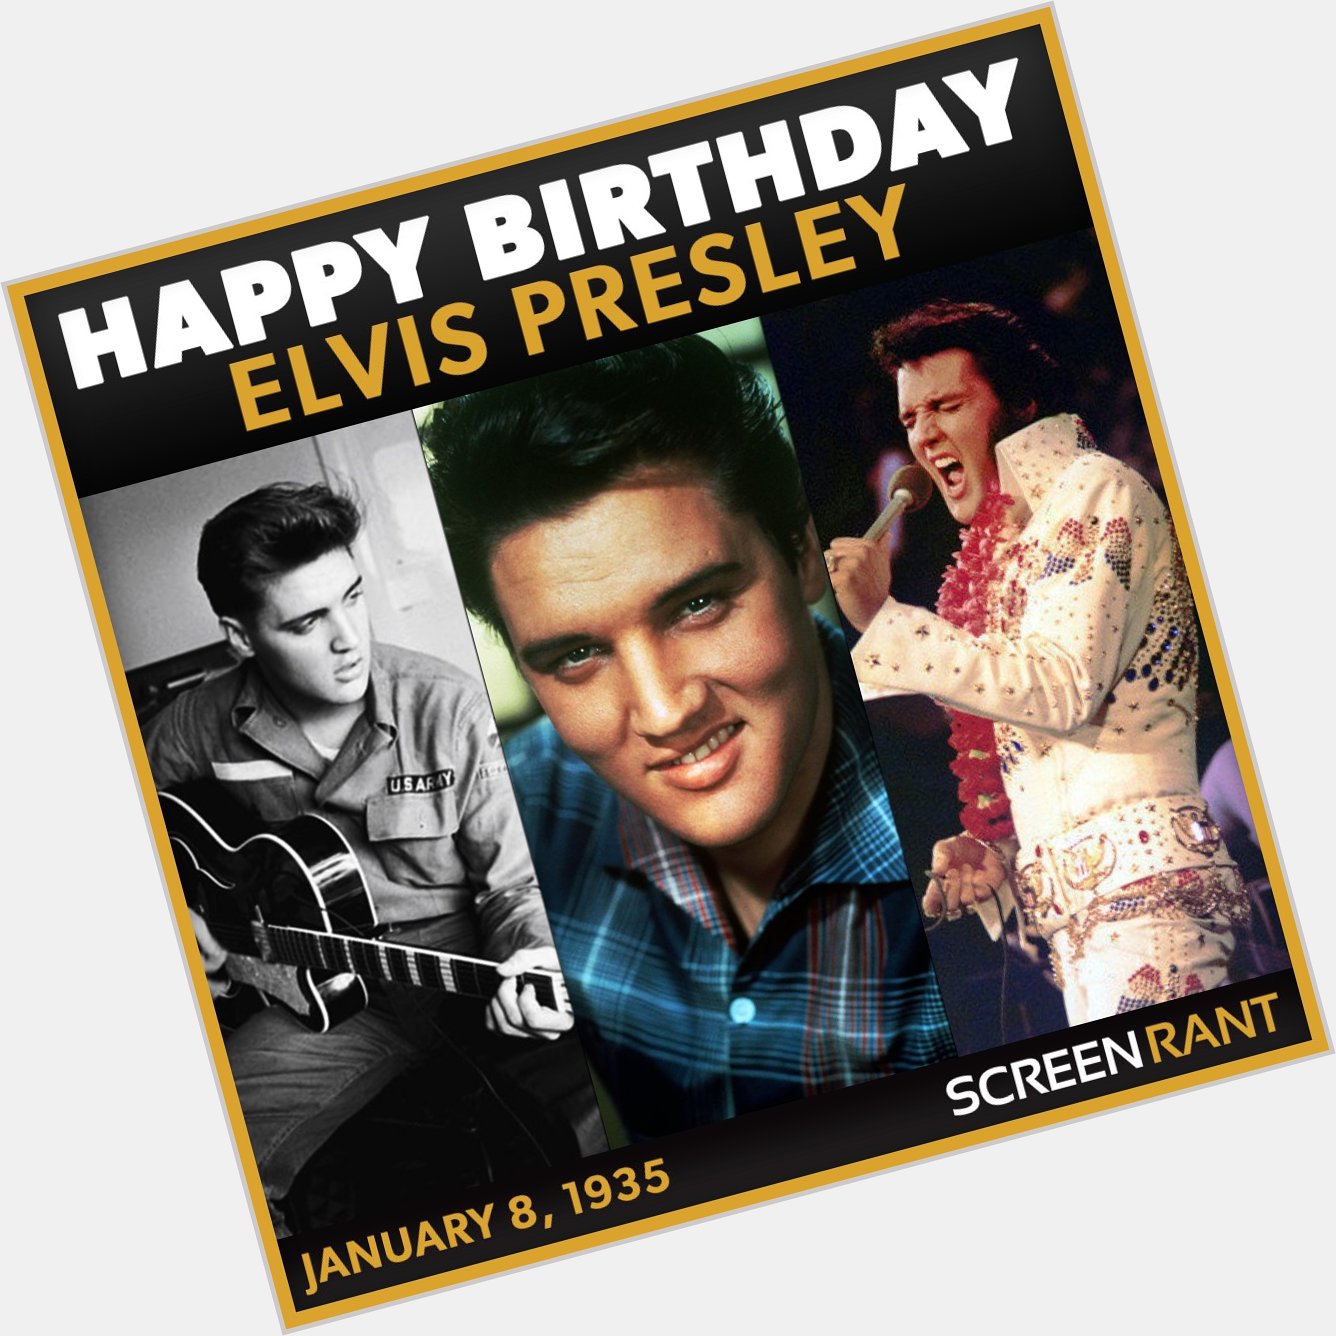 Happy Birthday to the King, Elvis Presley! Who would\ve been 86 today. What are some of your favorite Elvis songs? 